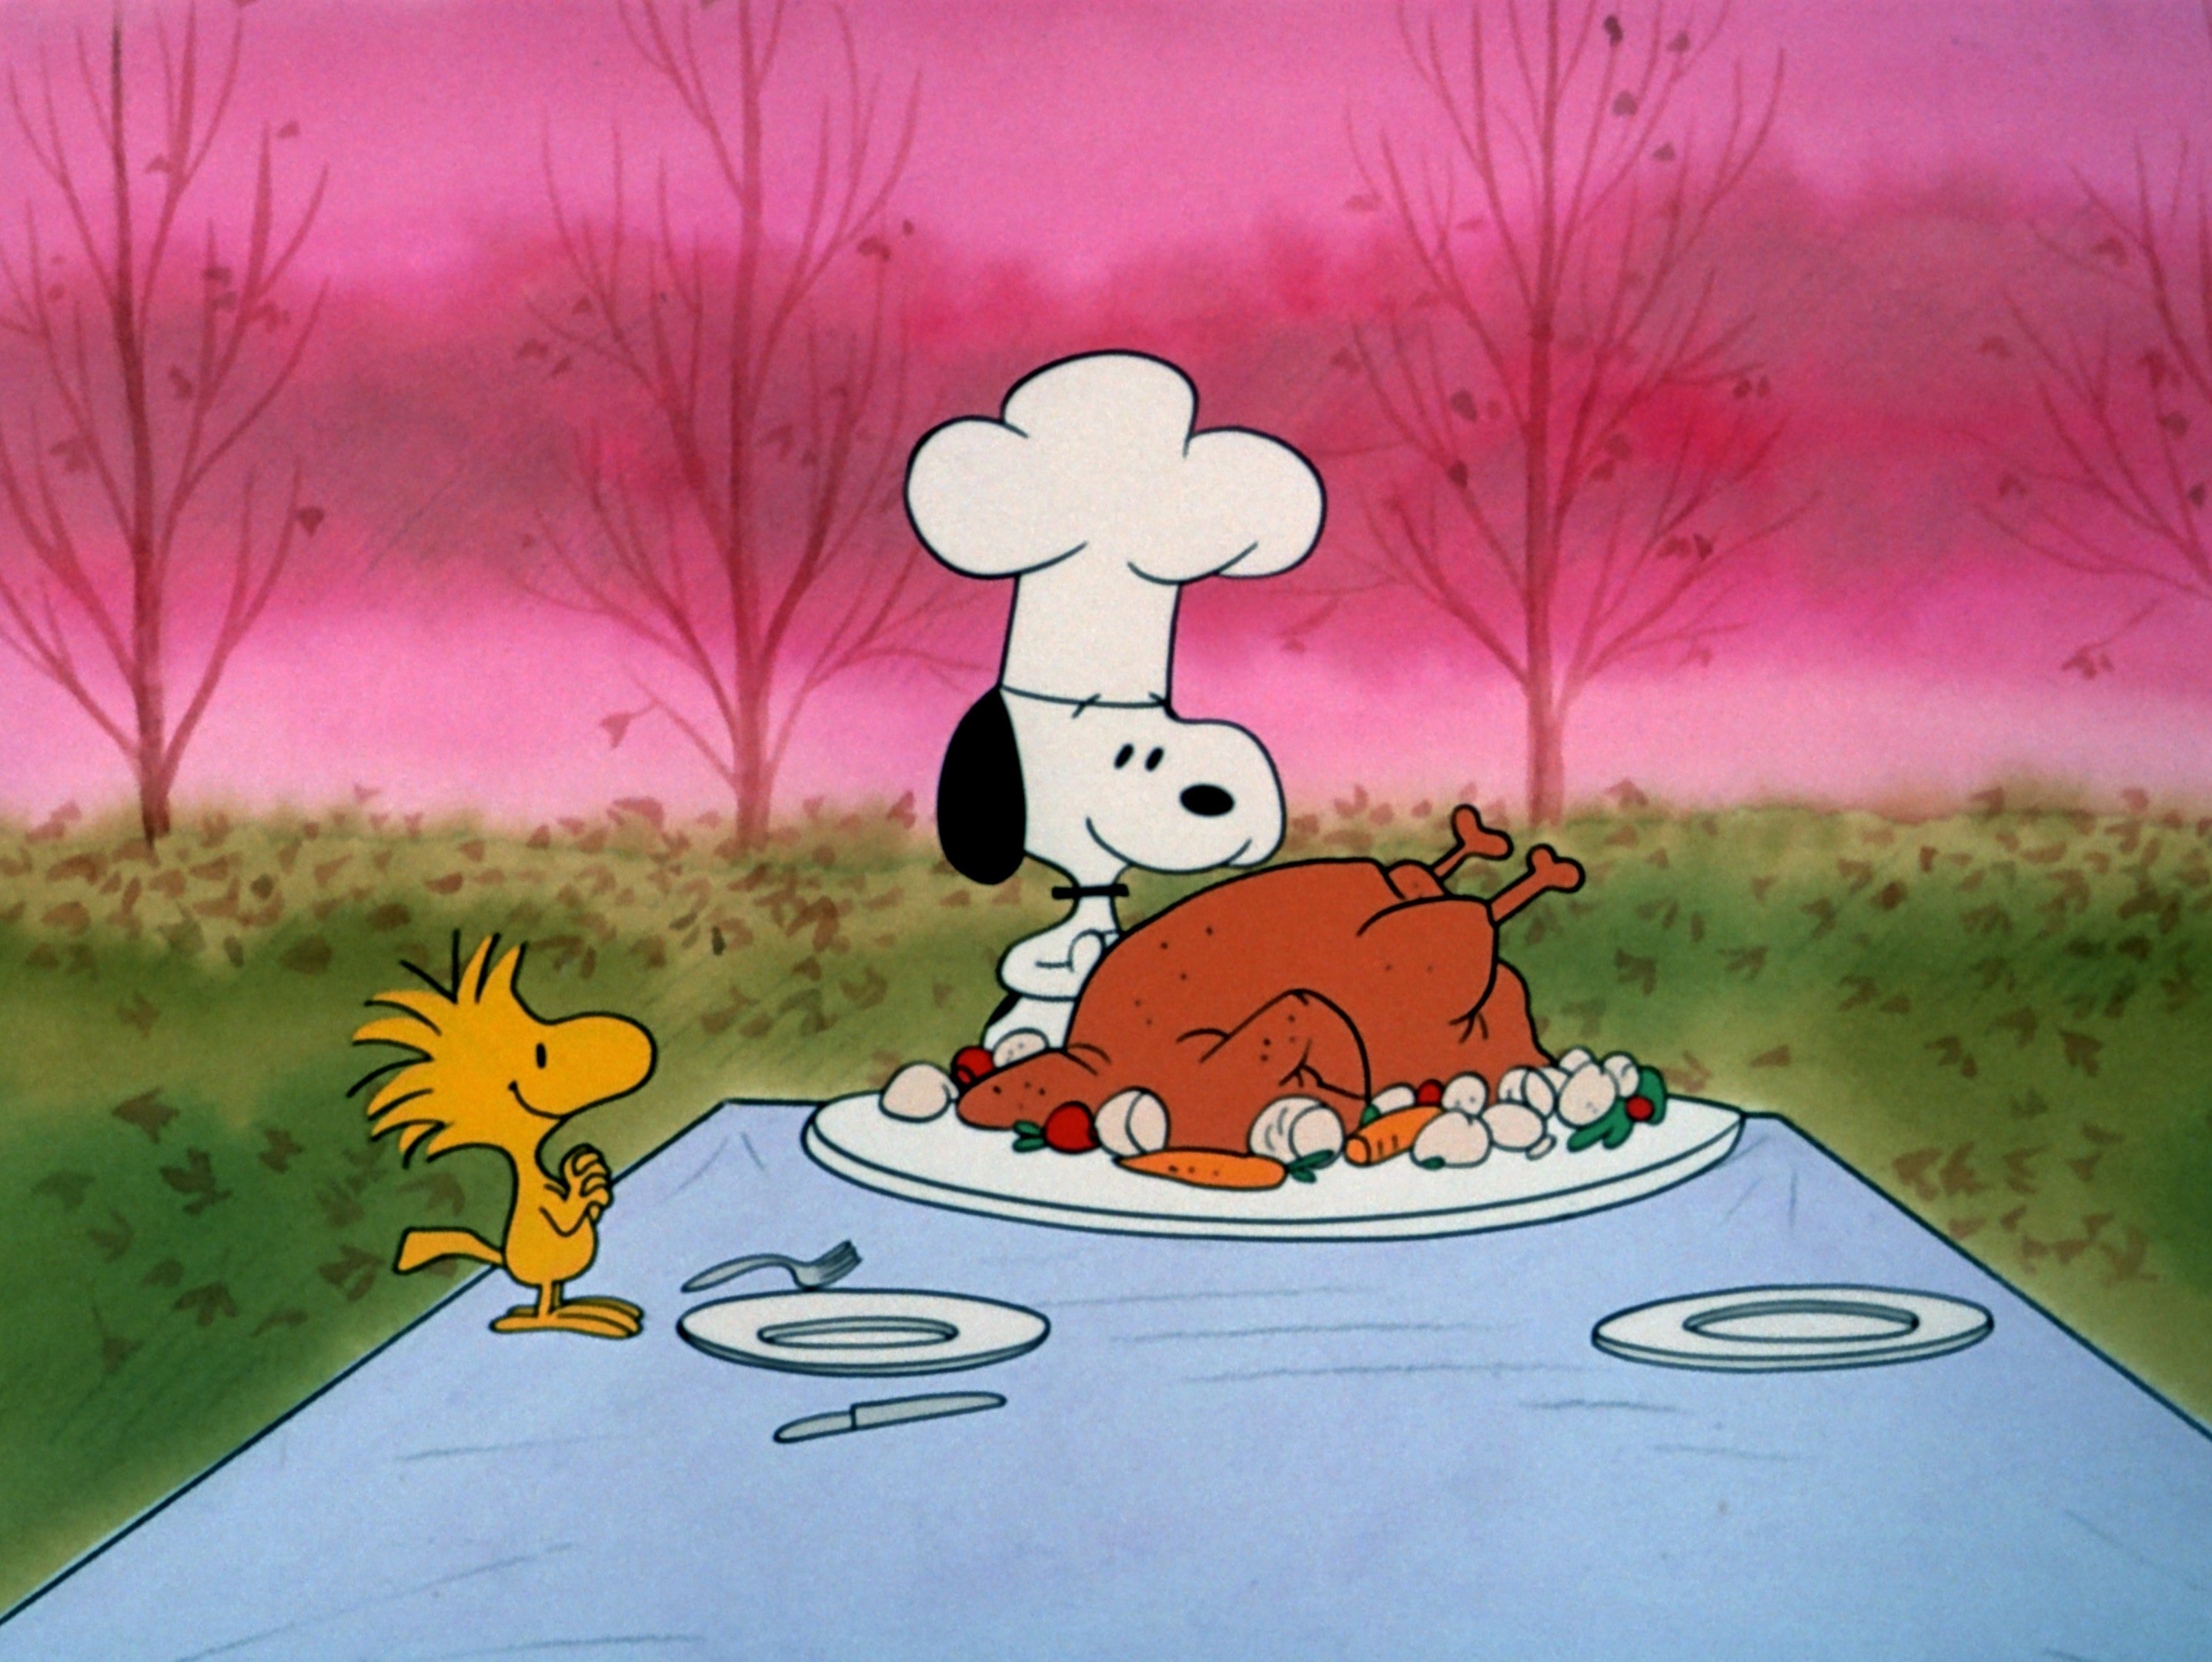 Woodstock looking at Snoopy carving a turkey in 'A Charlie Brown Thanksgiving'